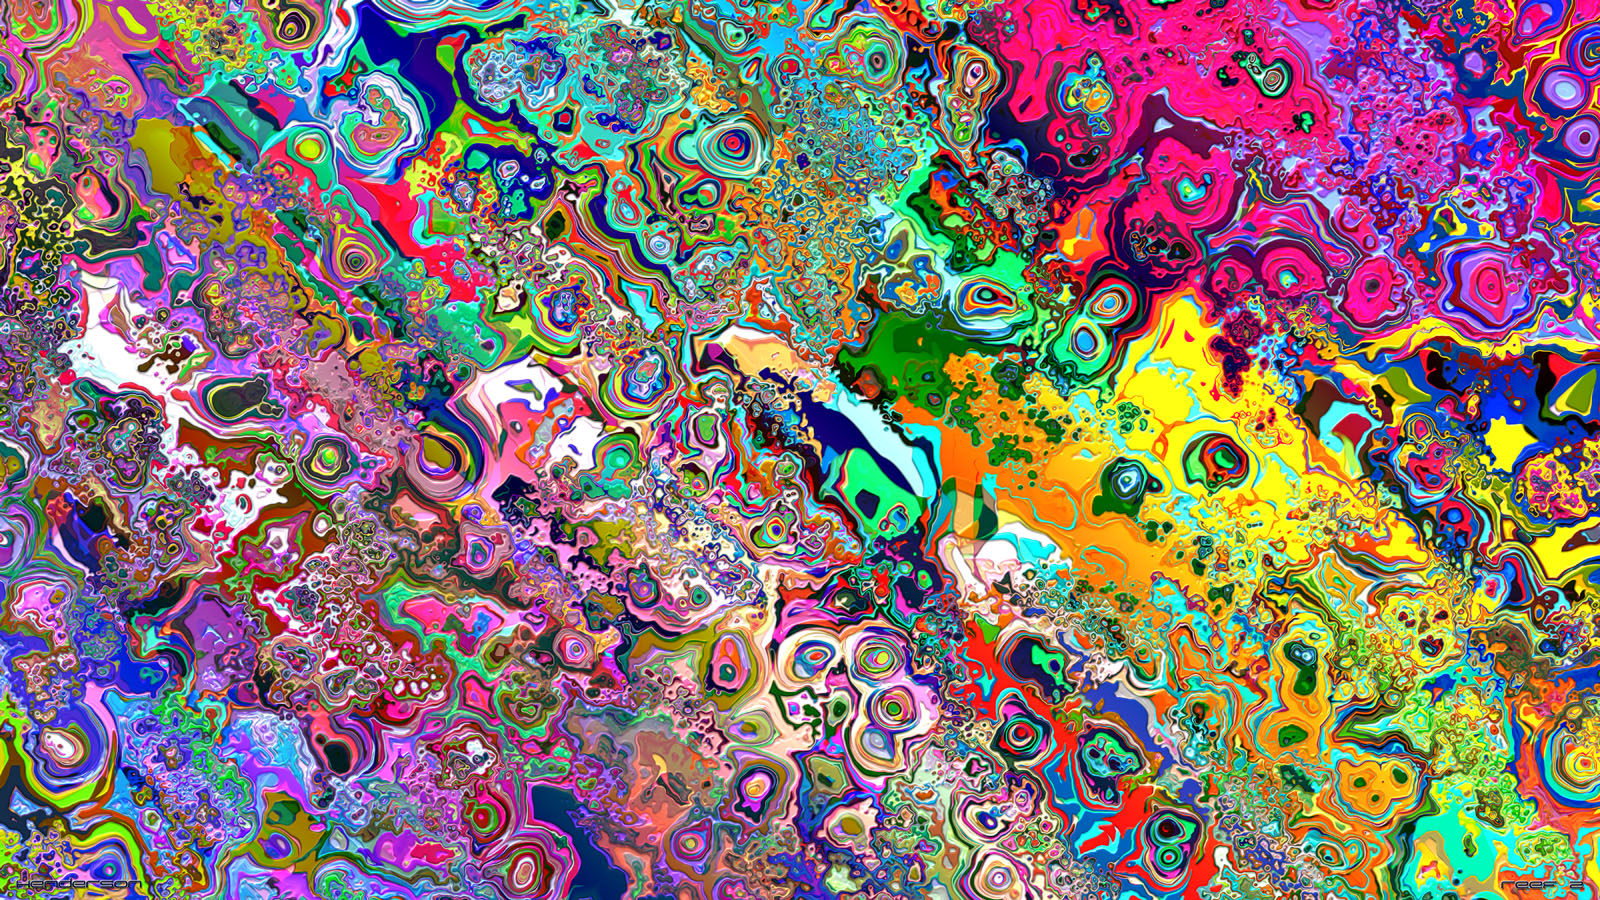 Psychedelic Desktop Background HD Image Amp Pictures Becuo